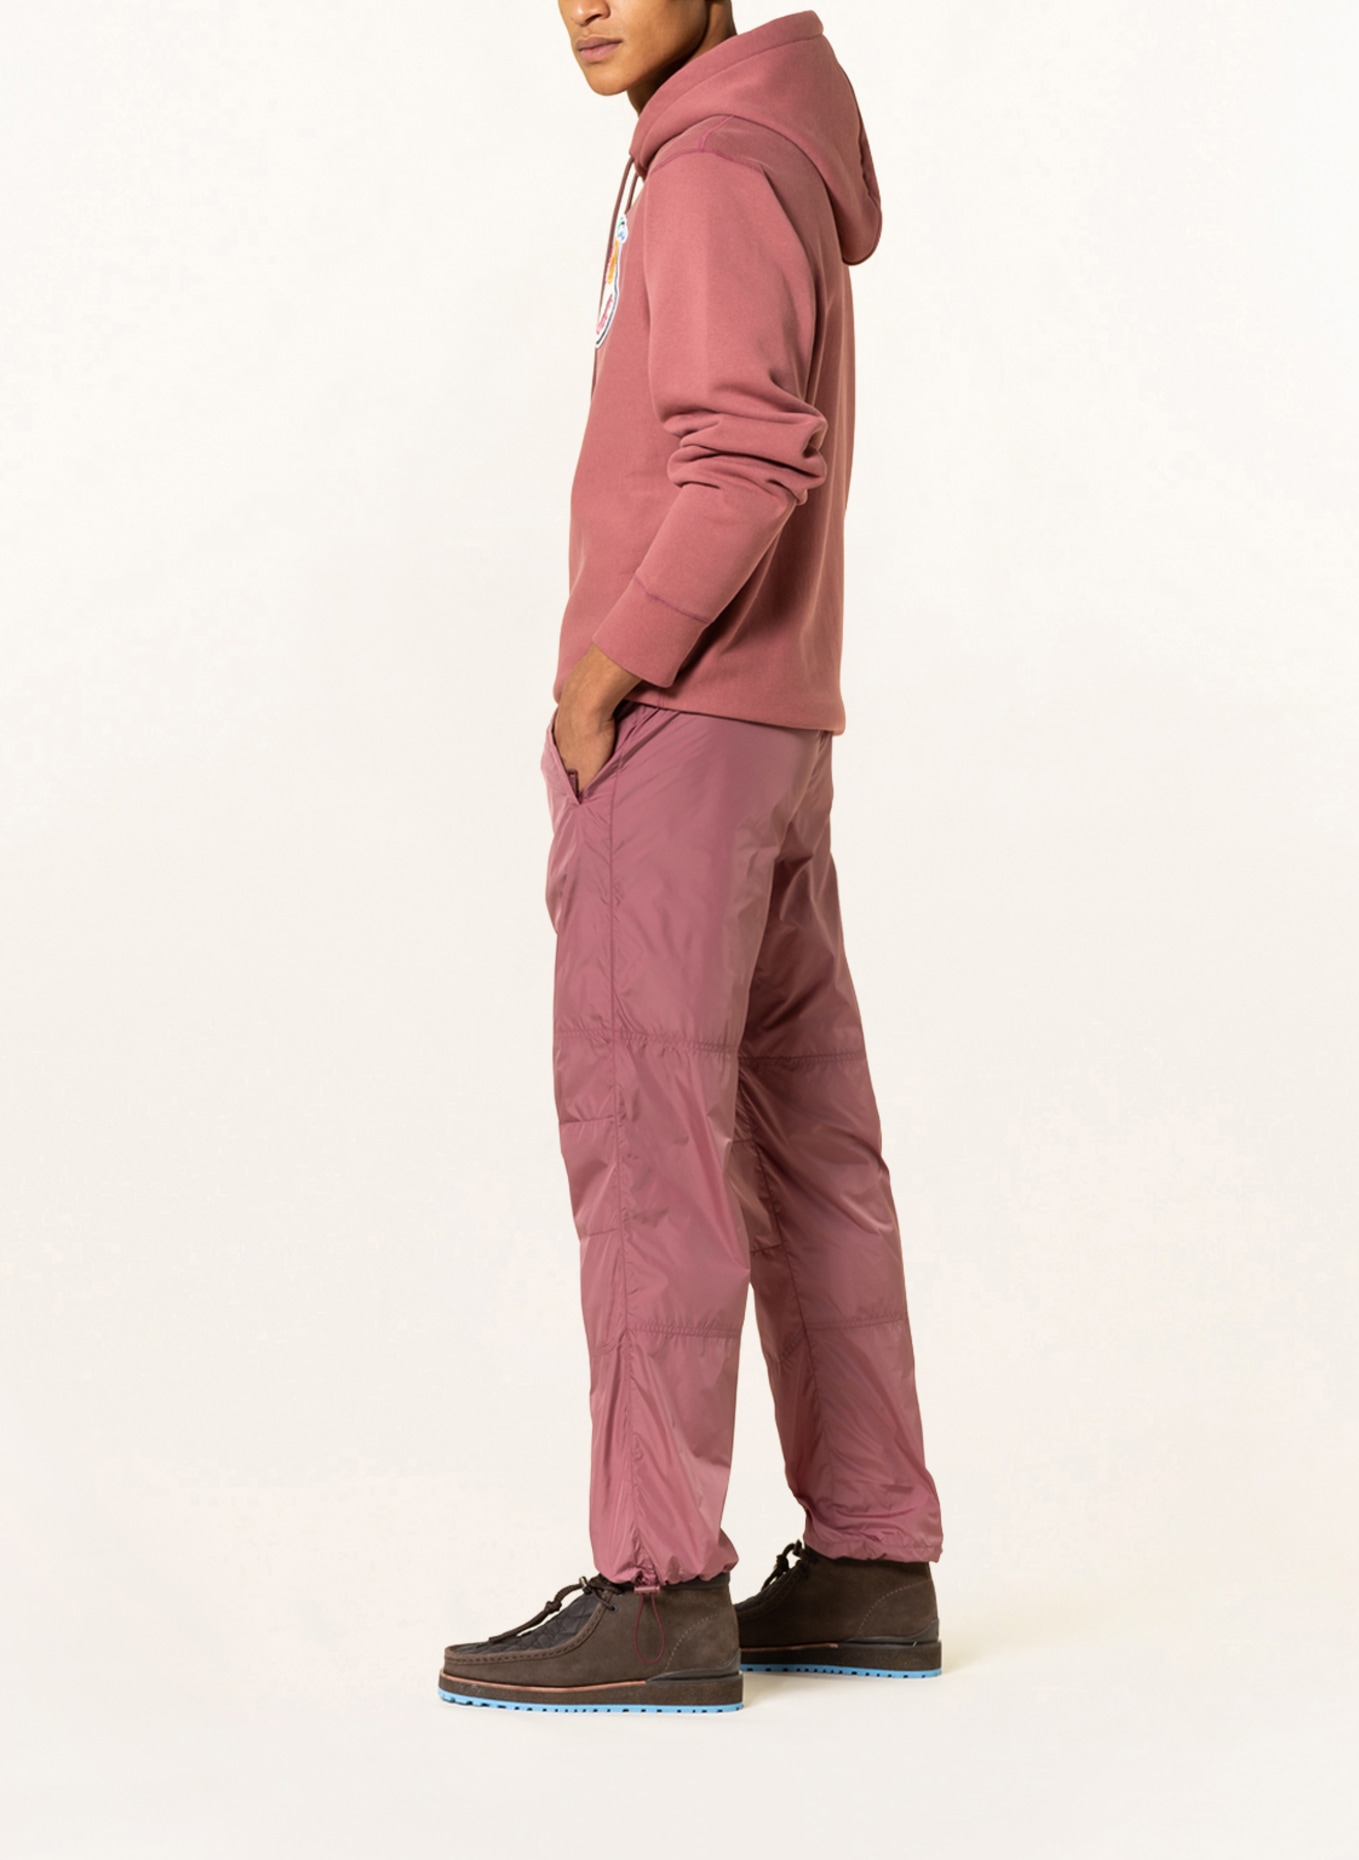 MONCLER GENIUS Trousers in jogger style , Color: DUSKY PINK (Image 4)